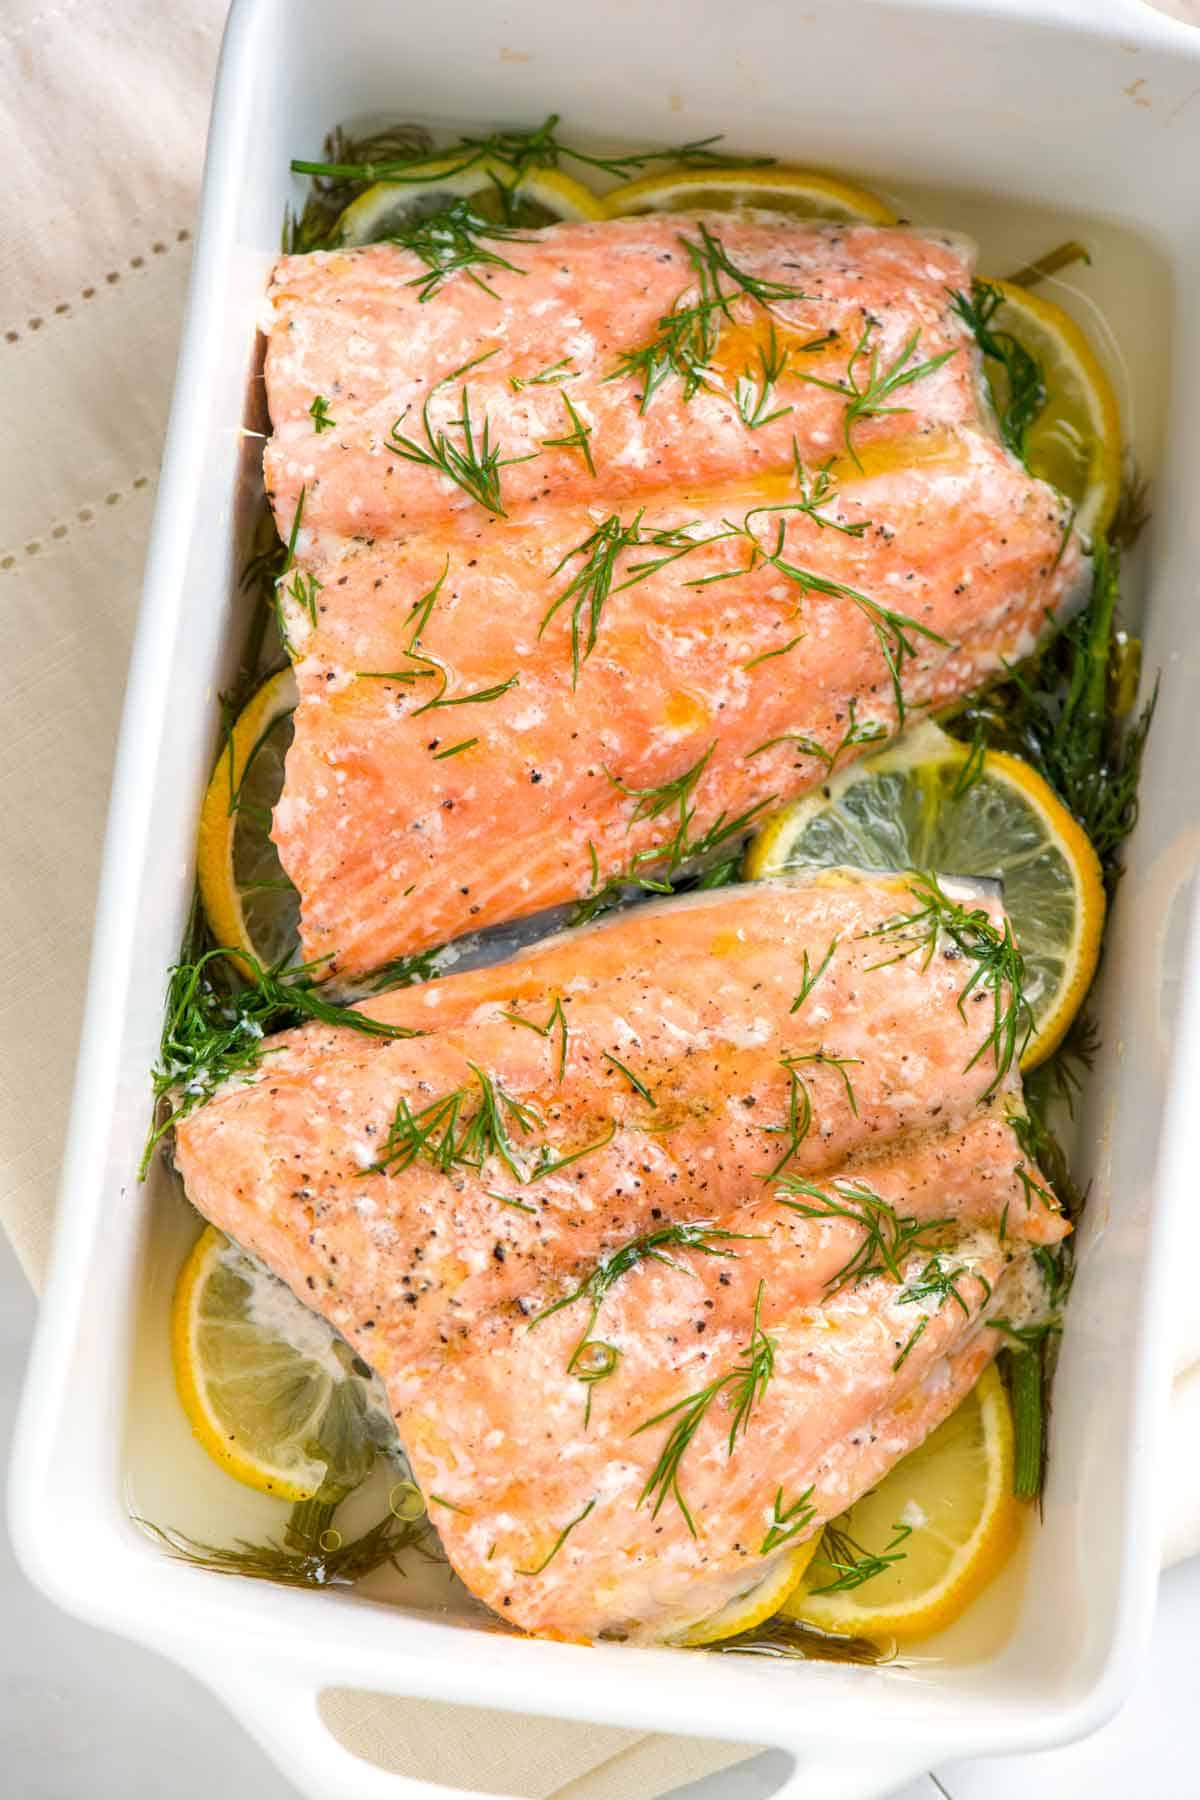 Perfectly Baked Salmon Recipe with Lemon and Dill